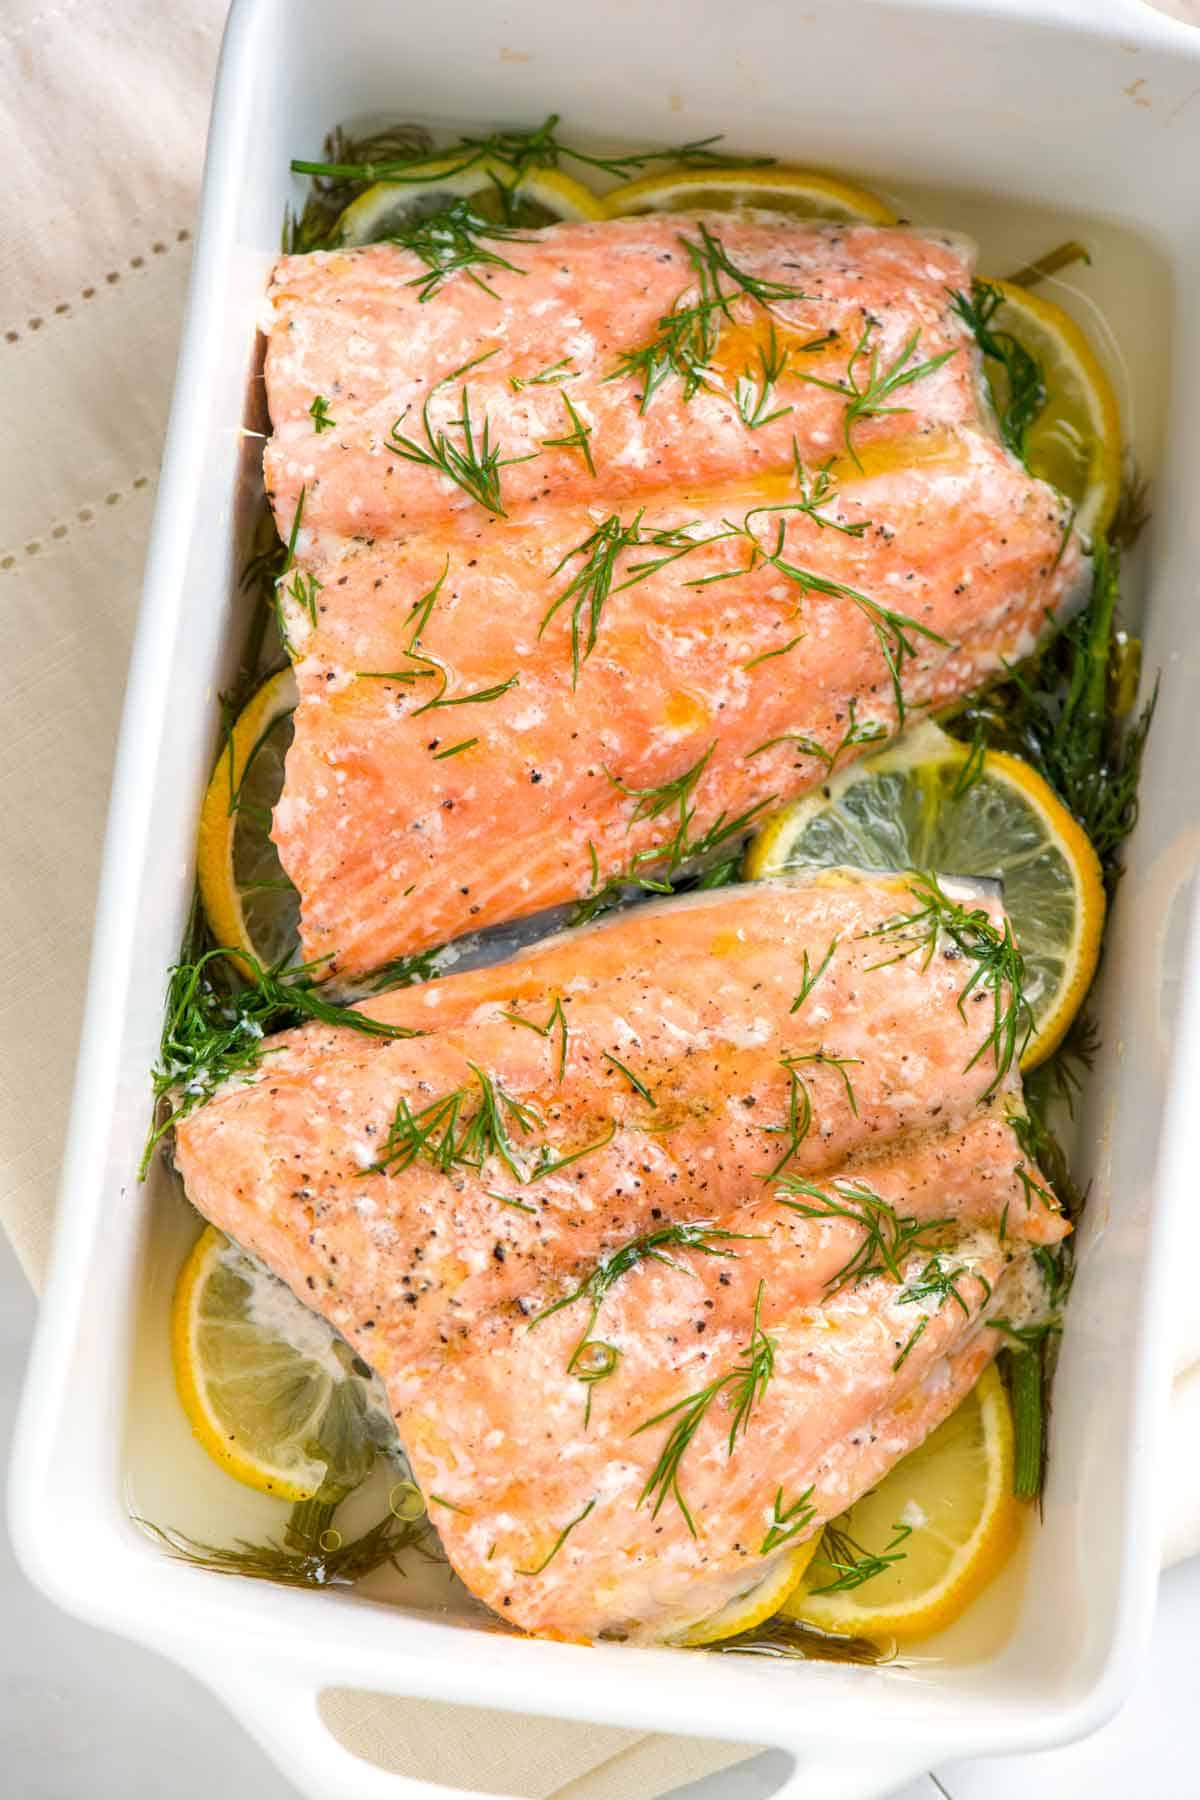 Perfectly Baked Salmon Recipe with Lemon and Dill